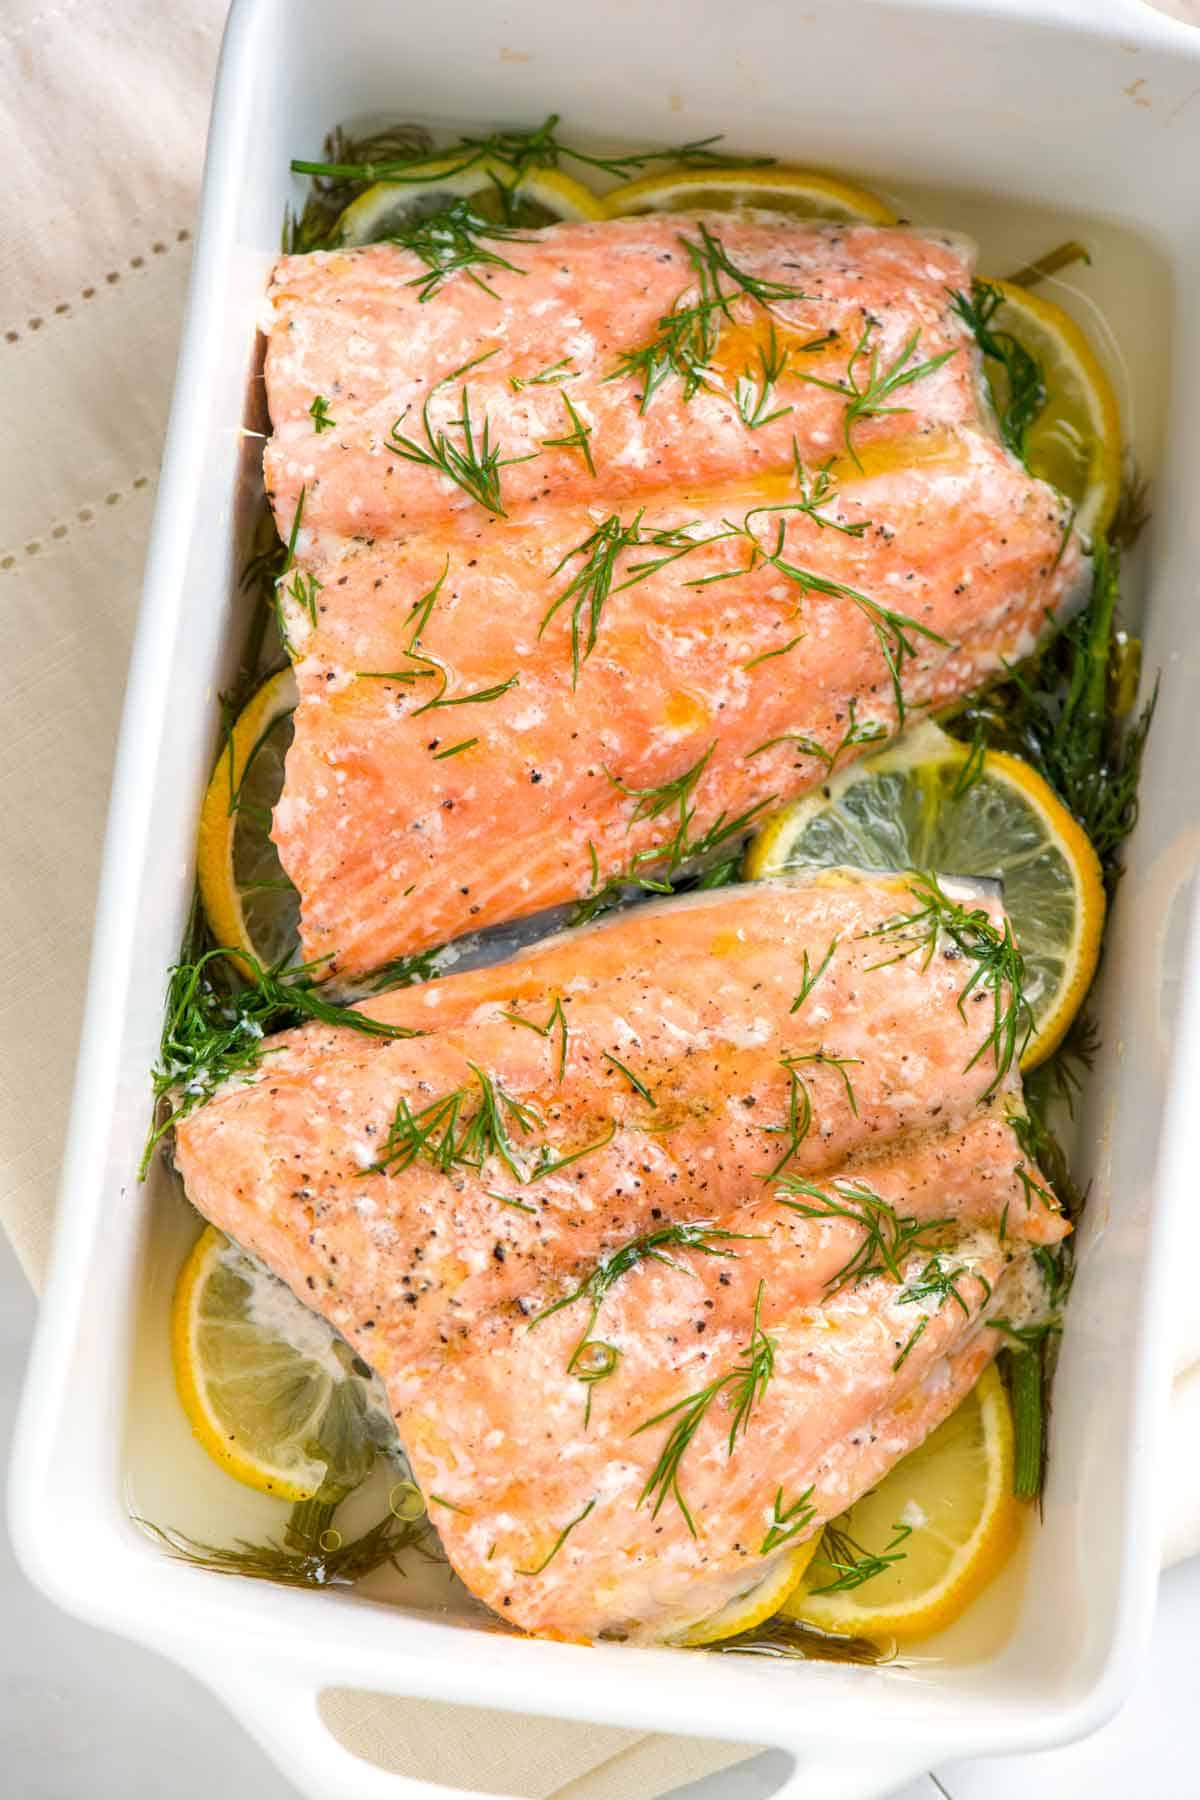 Perfectly Baked Salmon Recipe with Lemon and Dill